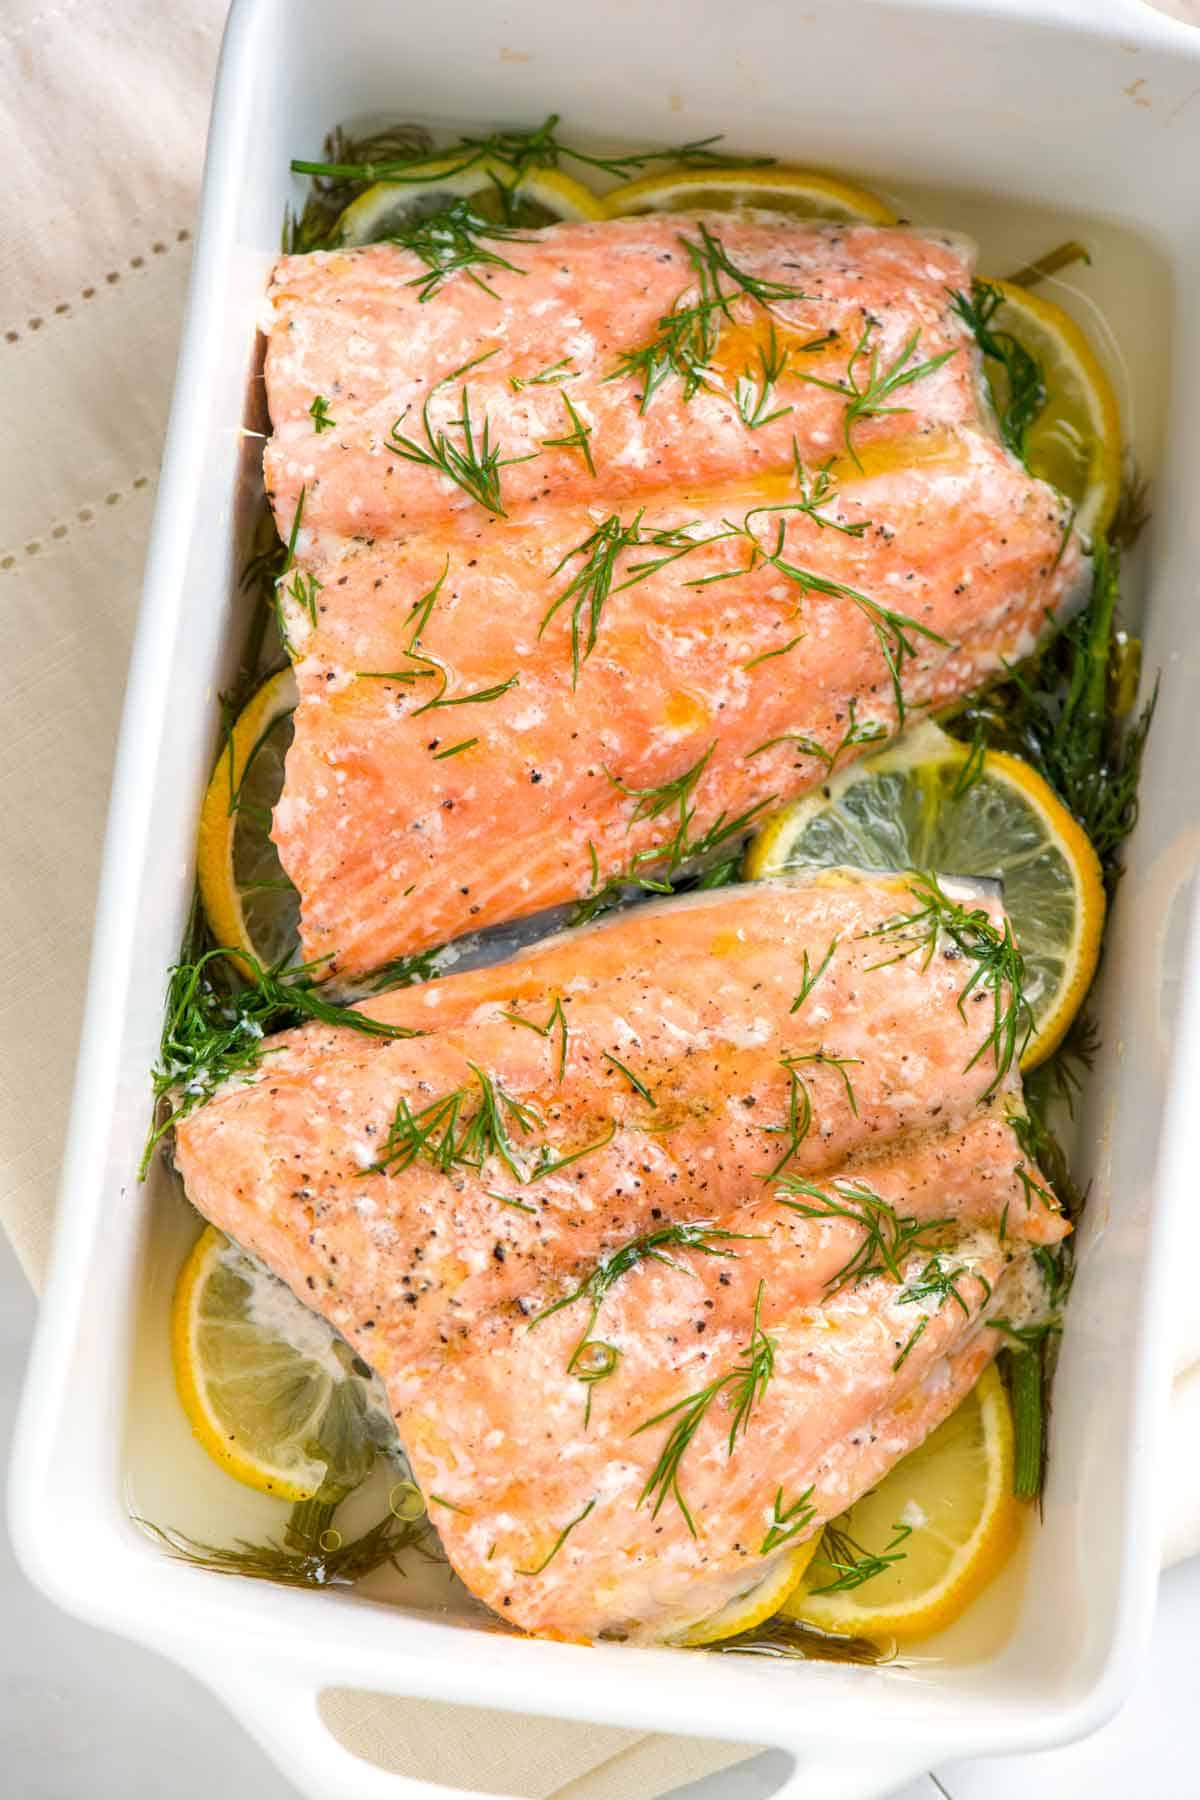 Perfectly Baked Salmon Recipe with Lemon and Dill